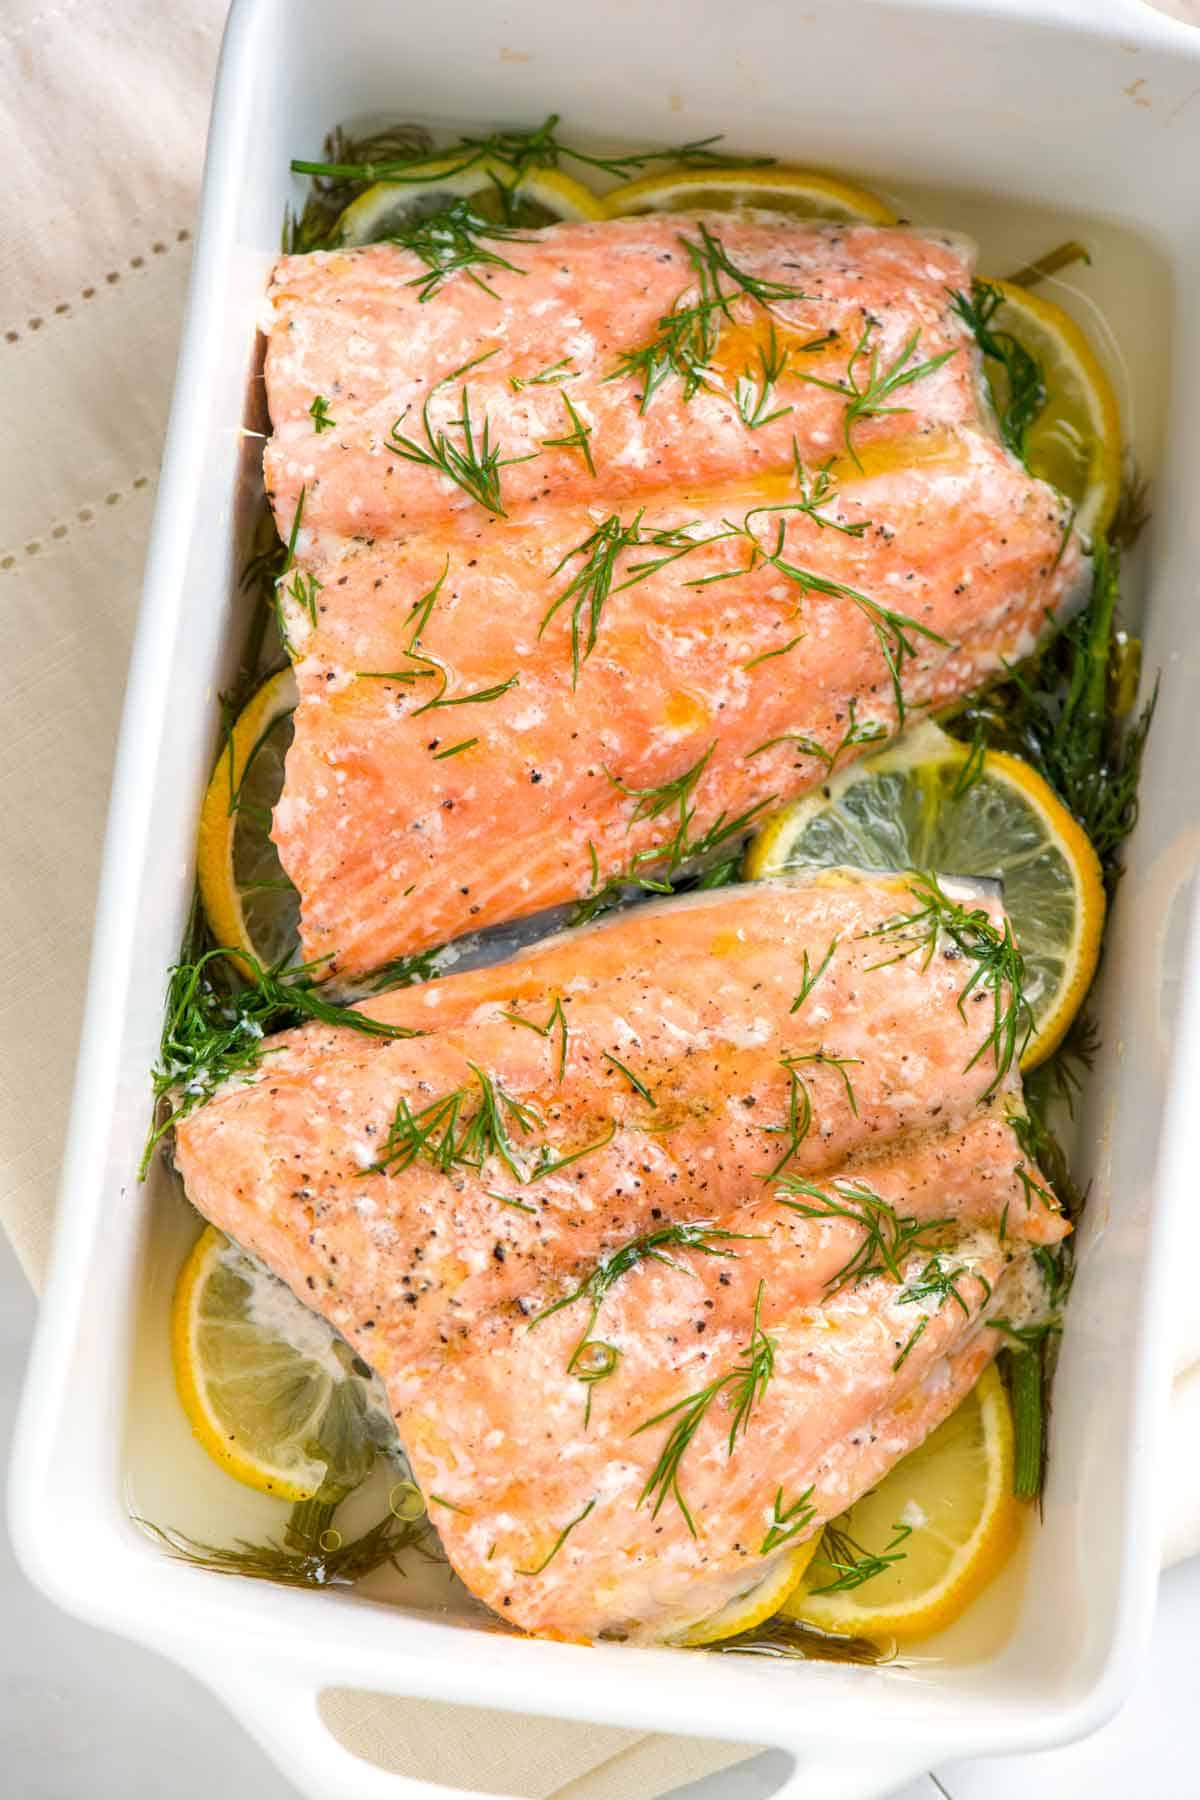 Perfectly Baked Salmon Recipe with Lemon and Dill